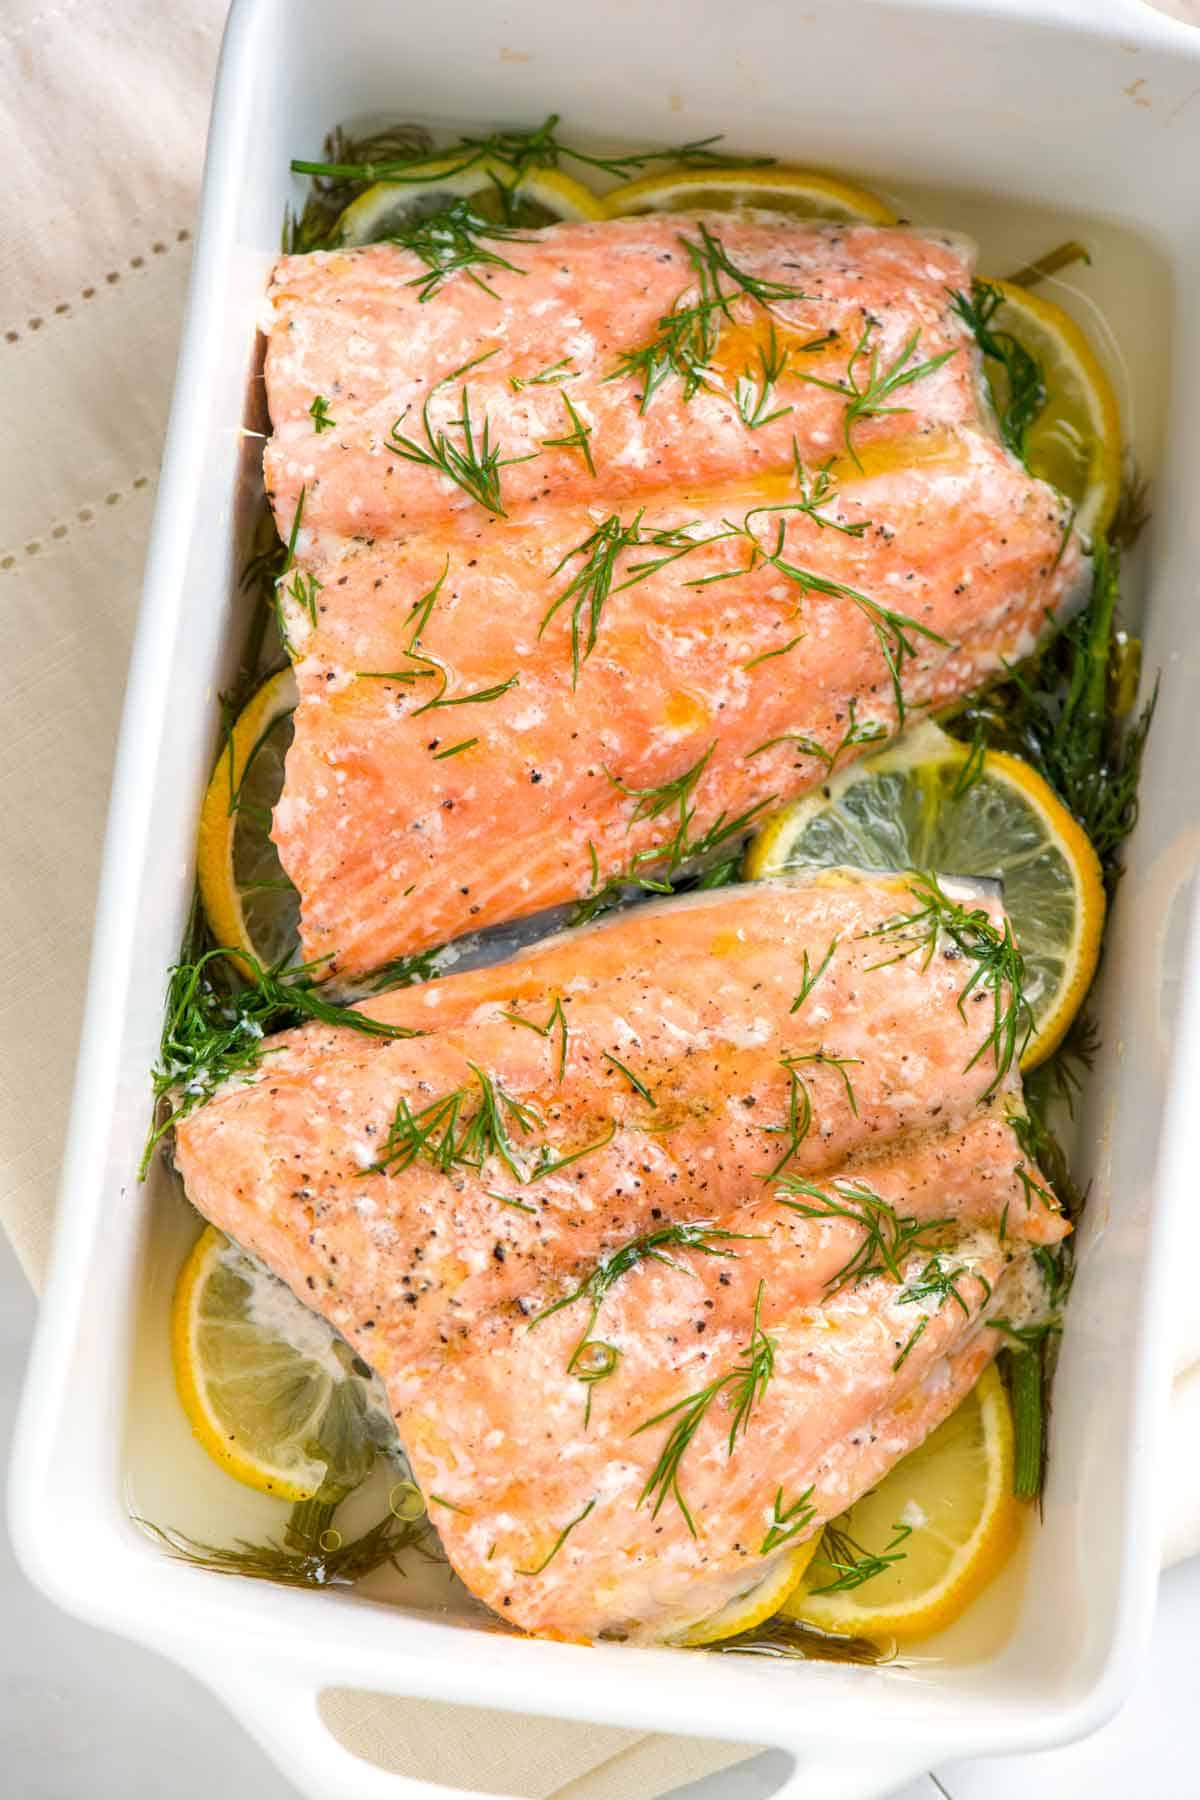 Perfectly Baked Salmon Recipe with Lemon and Dill